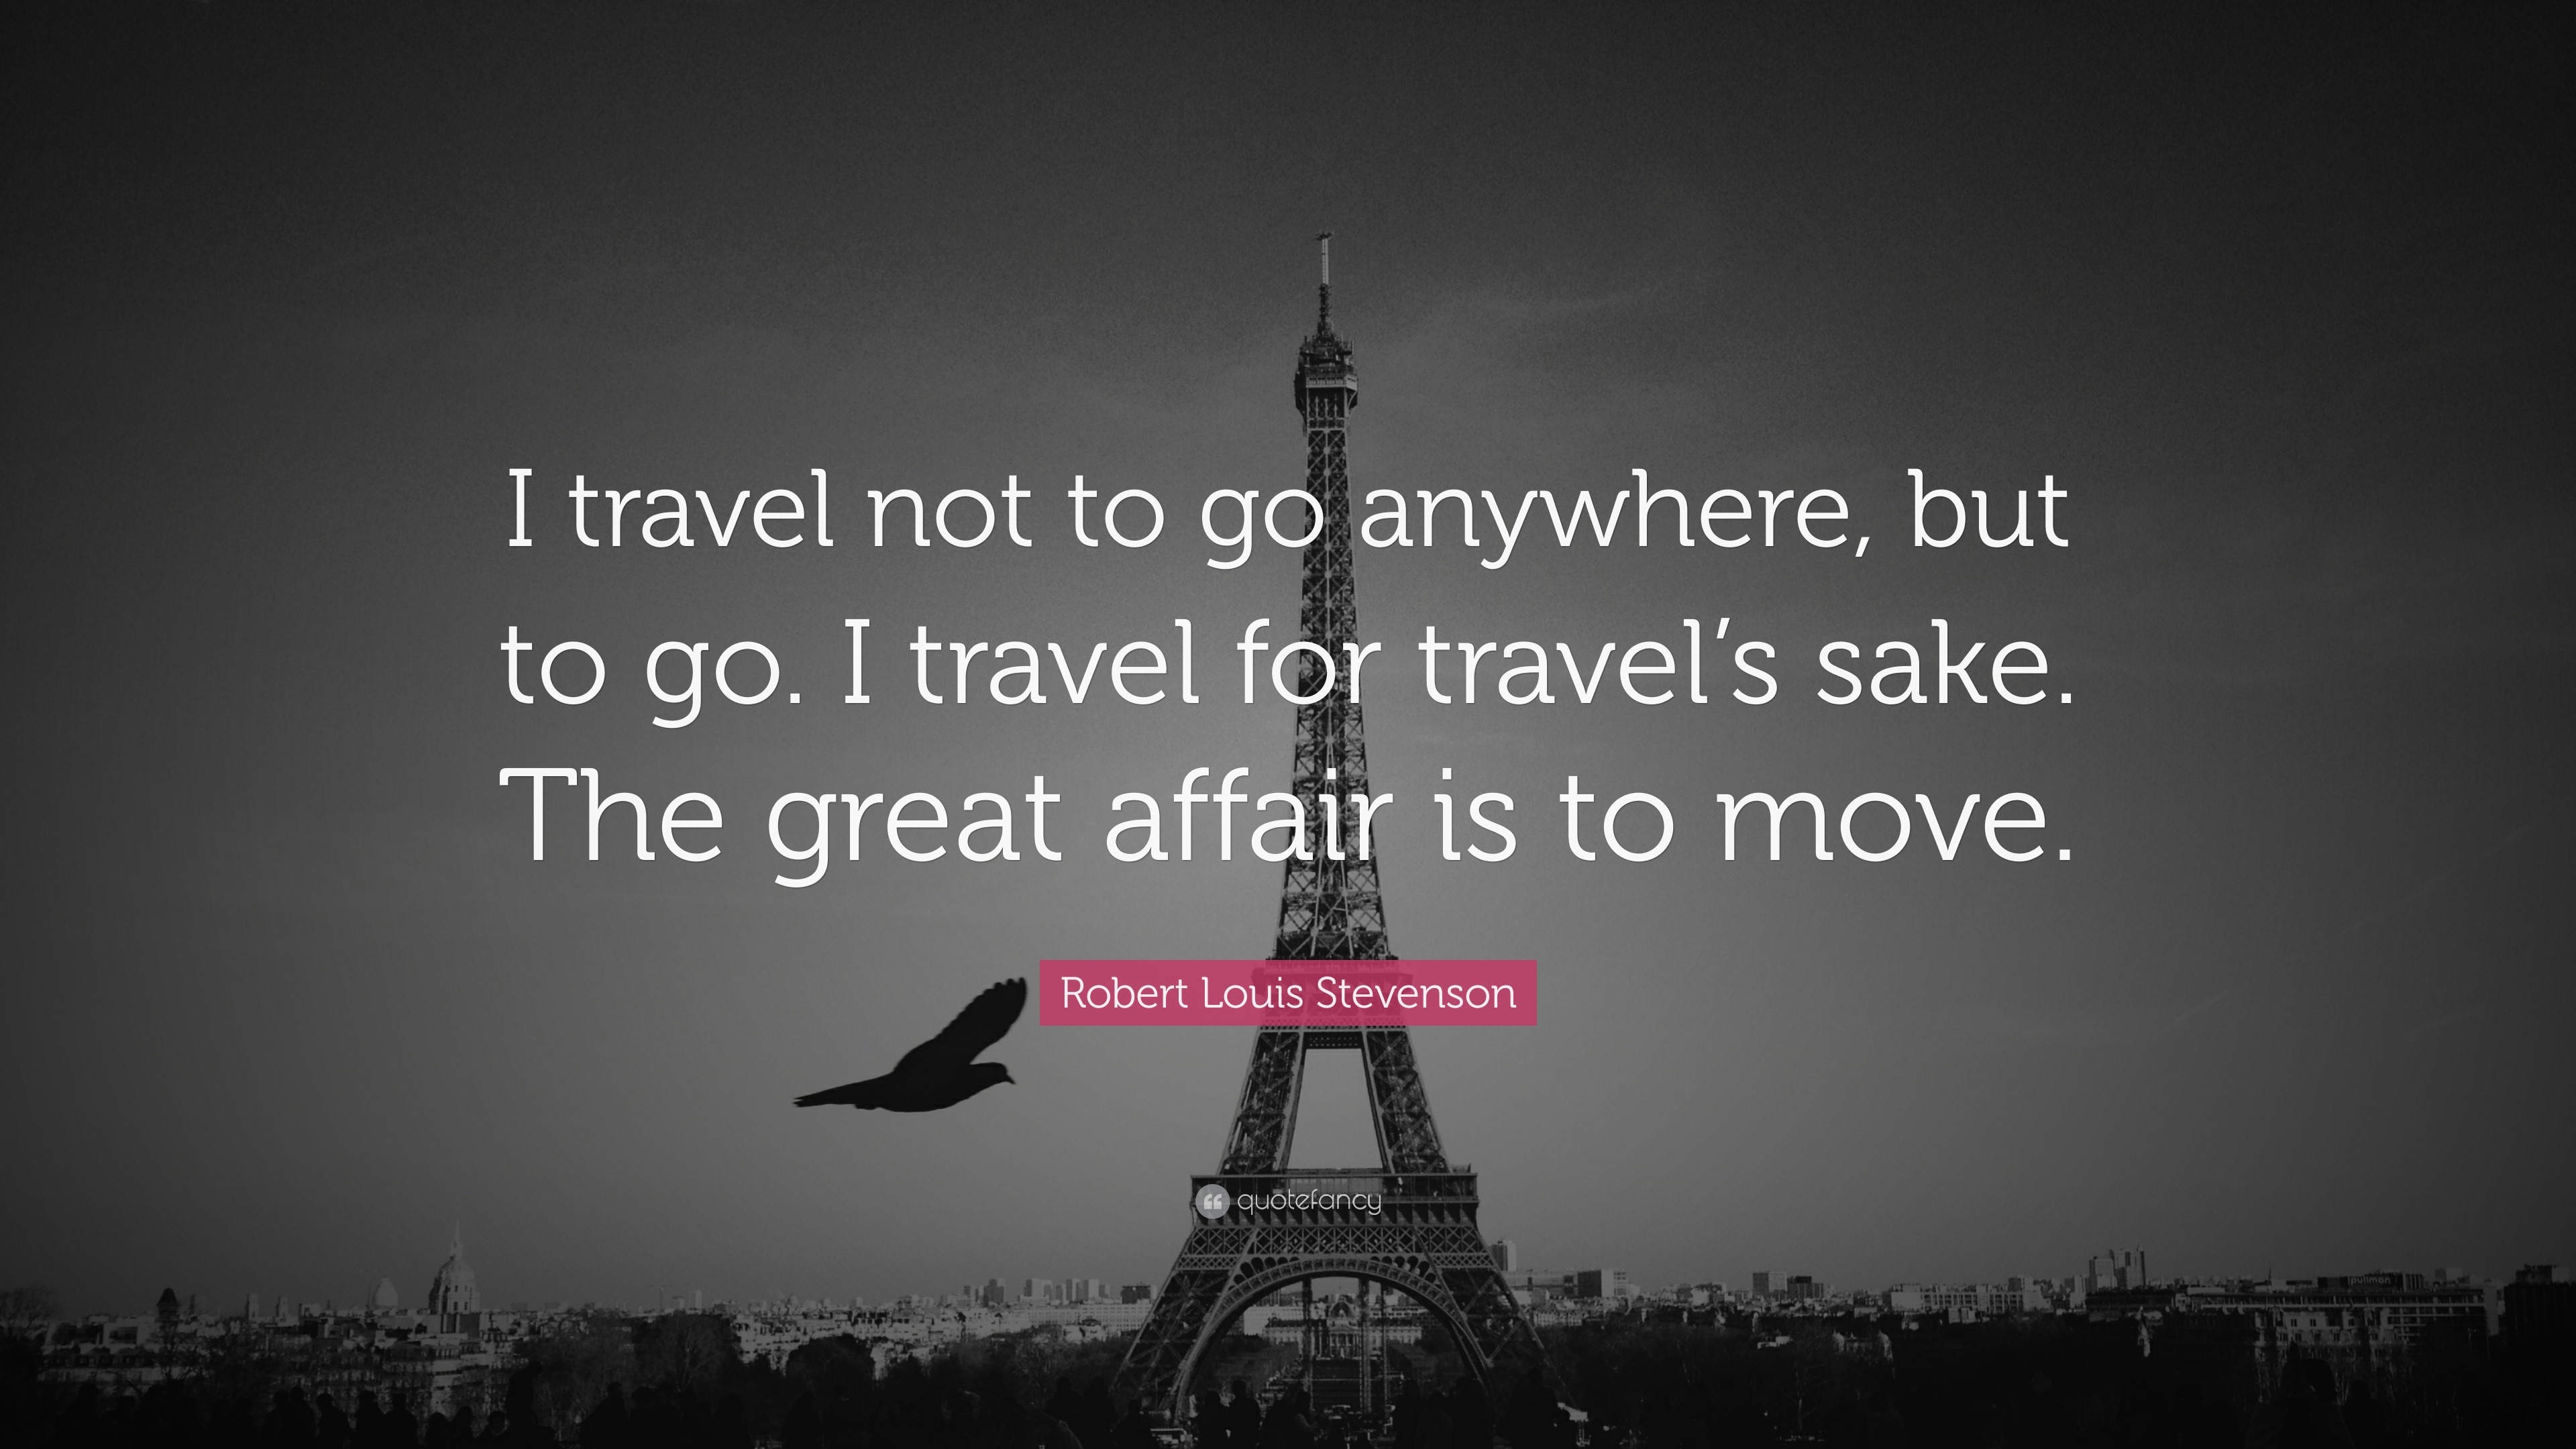 Robert Louis Stevenson Quote: “I travel not to go anywhere, but to go ...